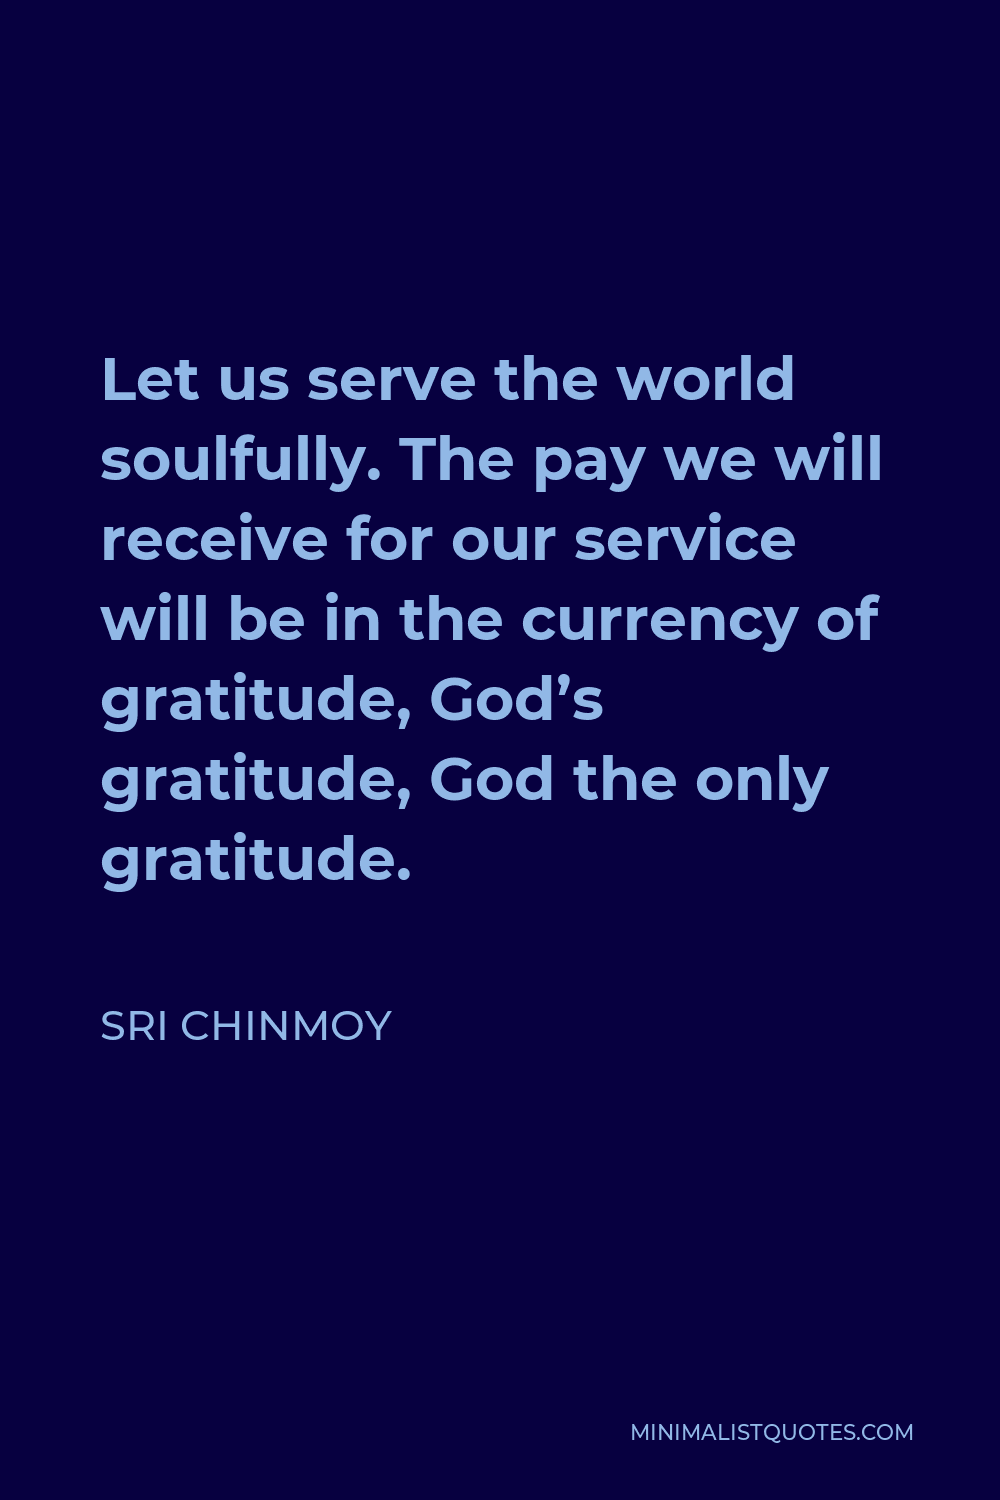 Sri Chinmoy Quote - Let us serve the world soulfully. The pay we will receive for our service will be in the currency of gratitude, God’s gratitude, God the only gratitude.